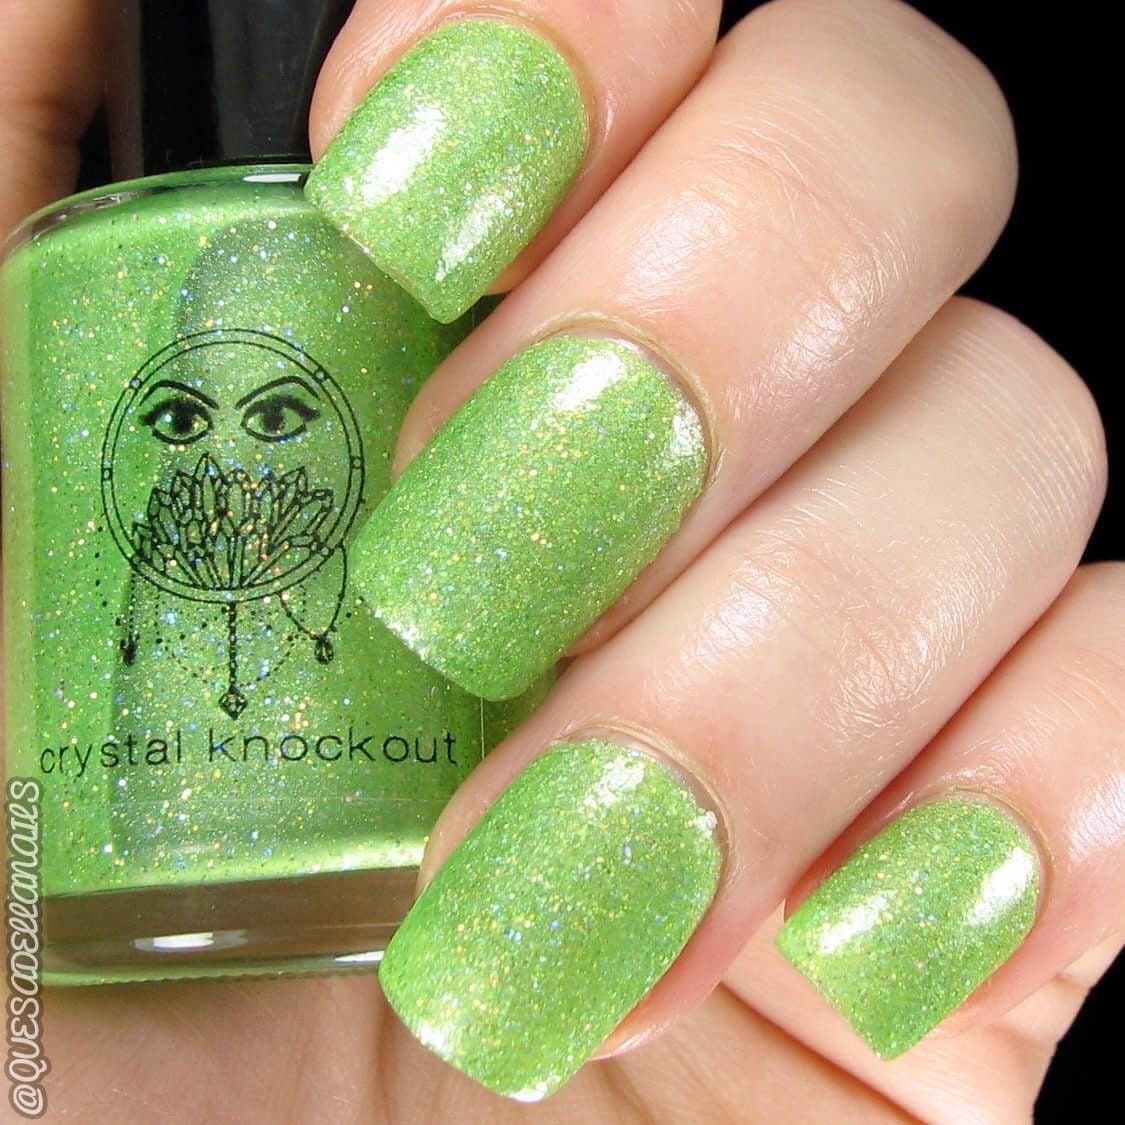 Bright Green Holographic Etsy Chemical Crystal Hurricane Glitter Gifts Collection for Vegan, - Knockout Polish Her Party Reduced Nail